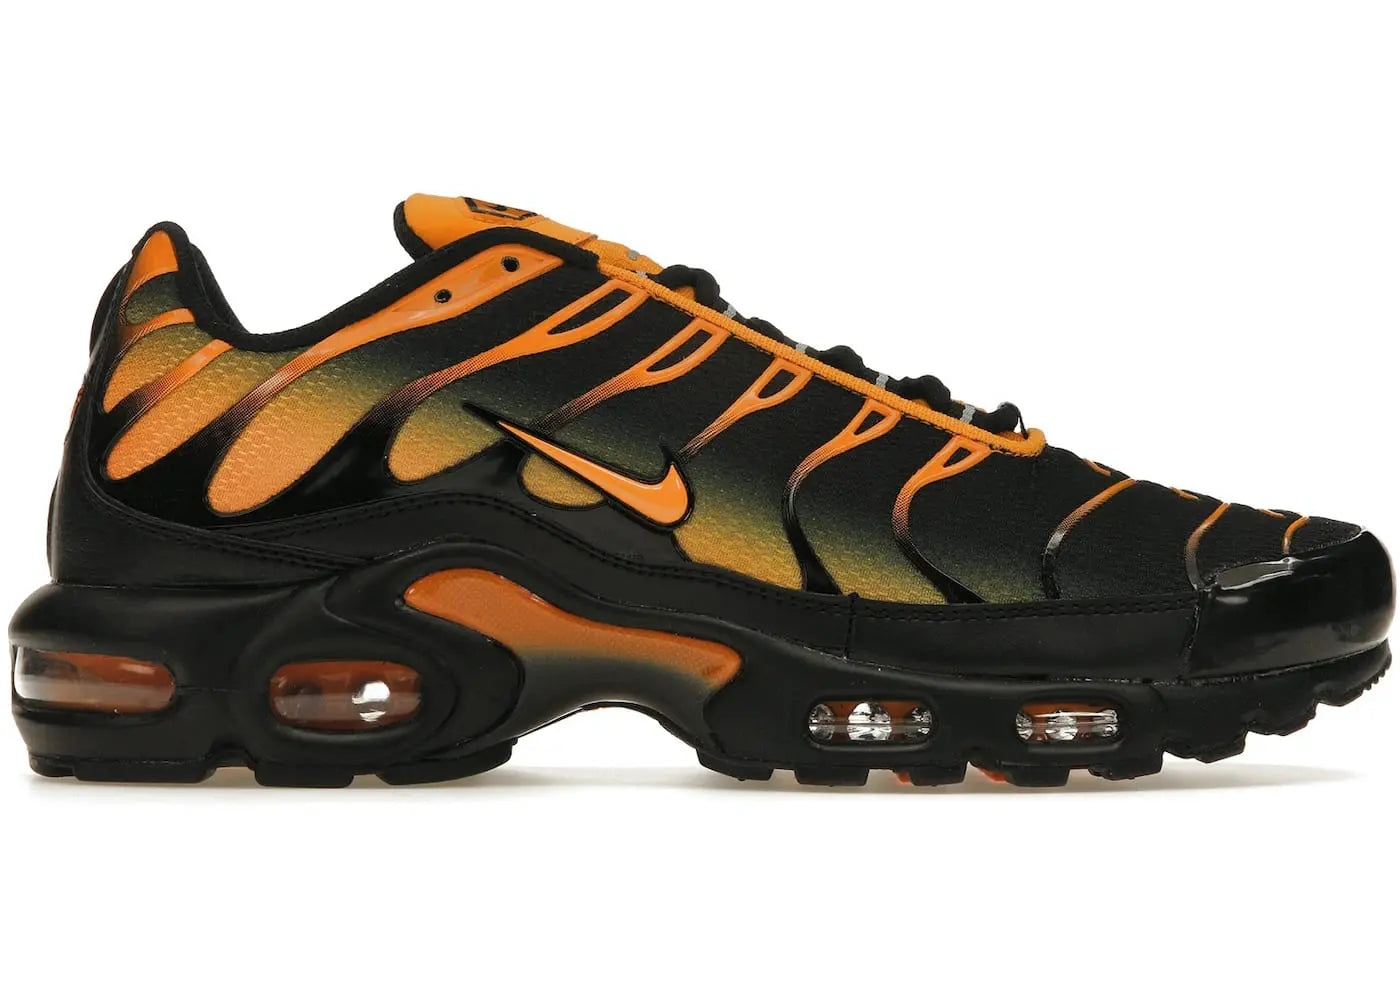 Nike Air Max Plus Black Sundial in Auckland, New Zealand - Shop name